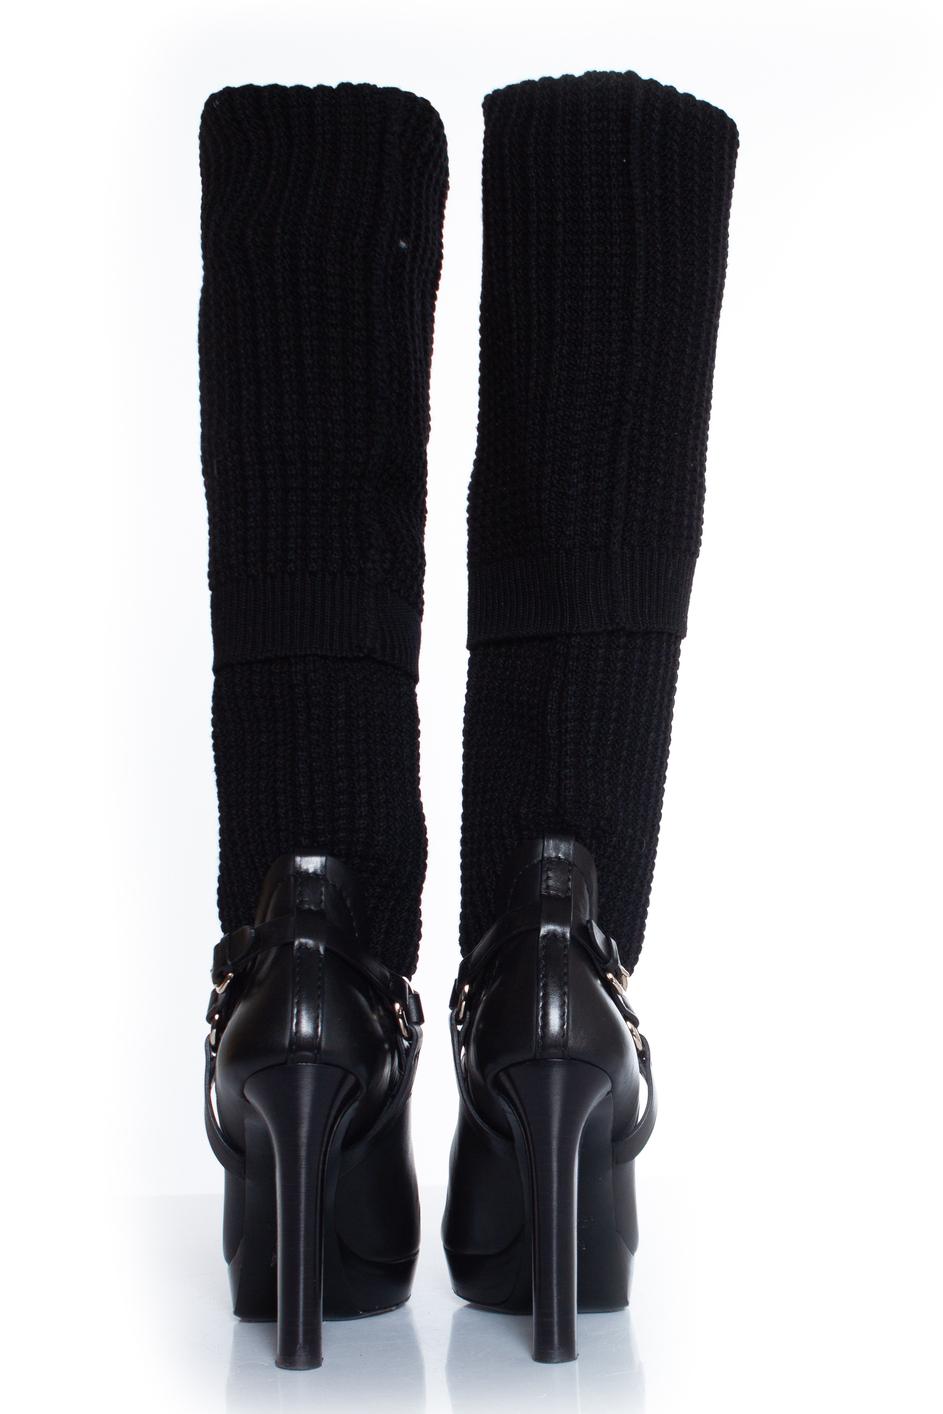 Gucci, Black over knee sock boots For Sale 2